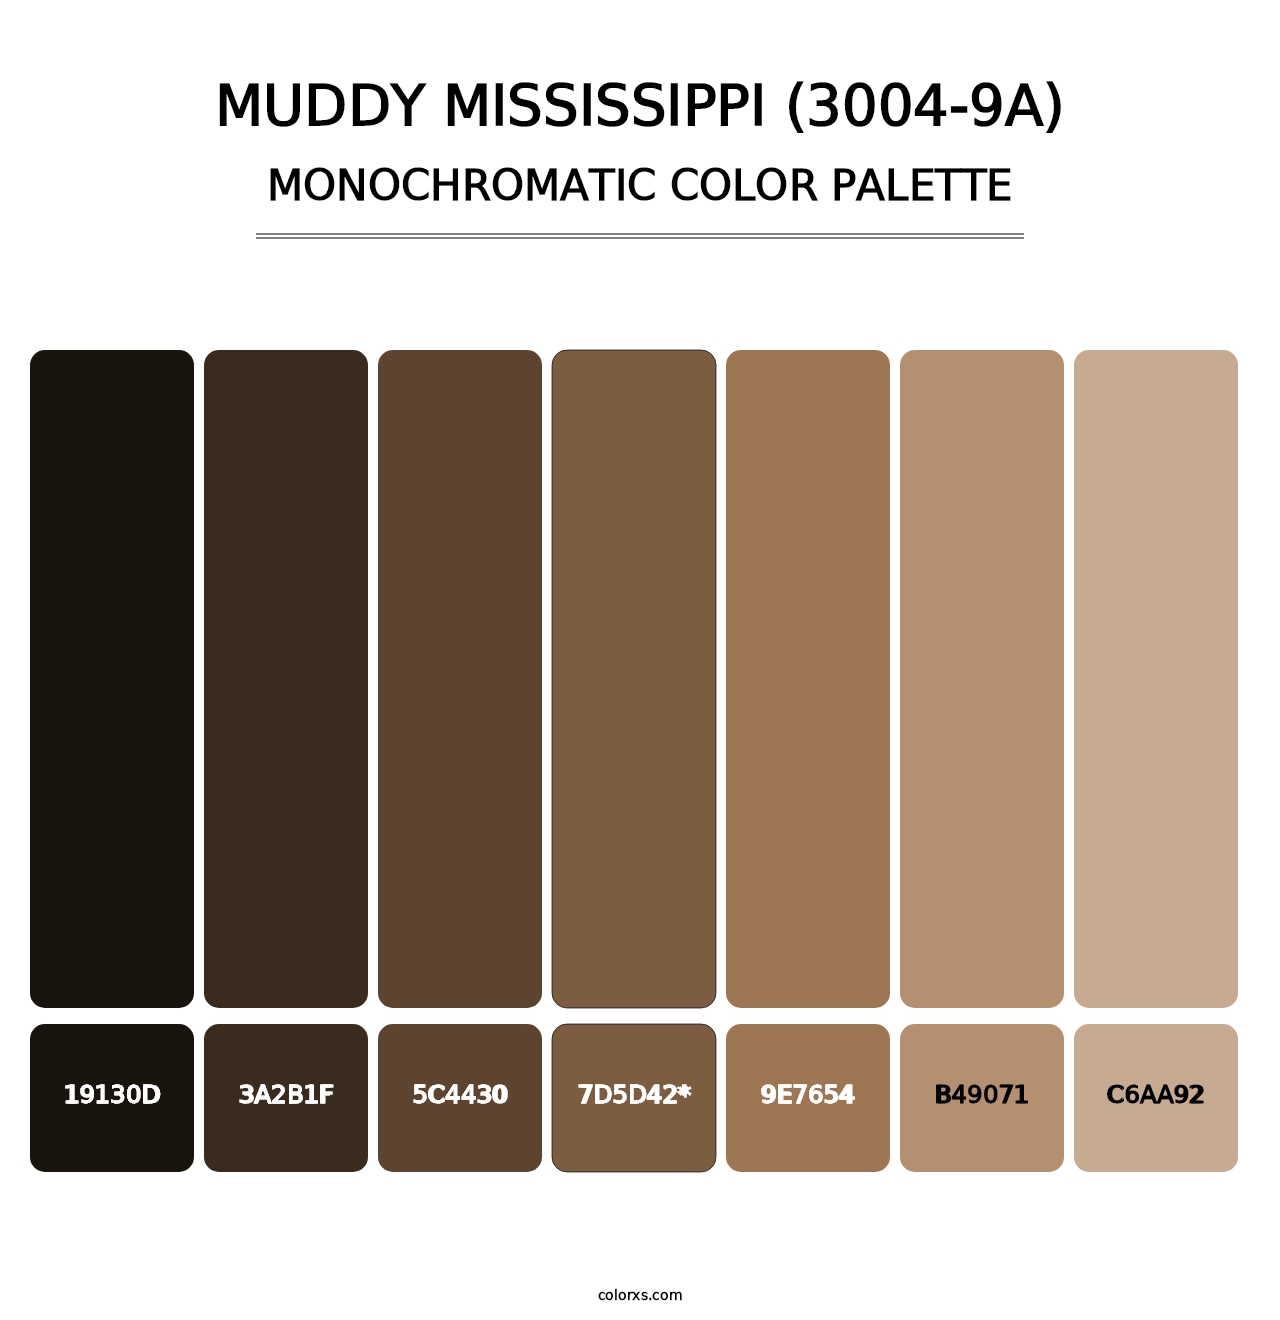 Muddy Mississippi (3004-9A) - Monochromatic Color Palette